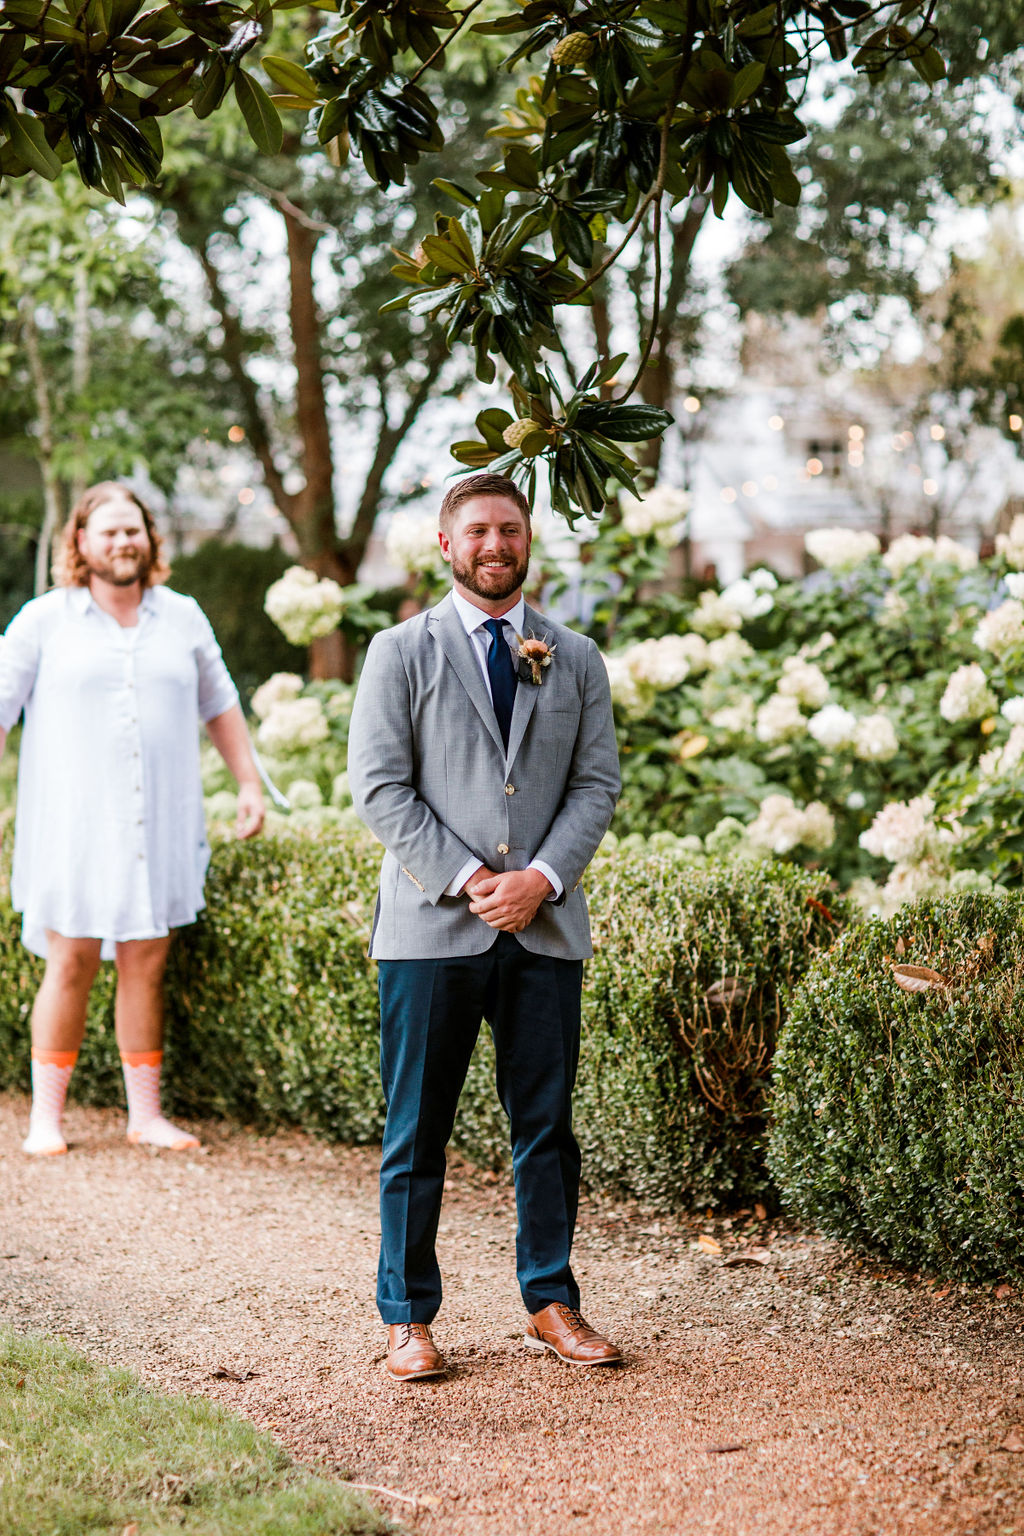 Playful first look with groomsmen | Nashville Bride Guide